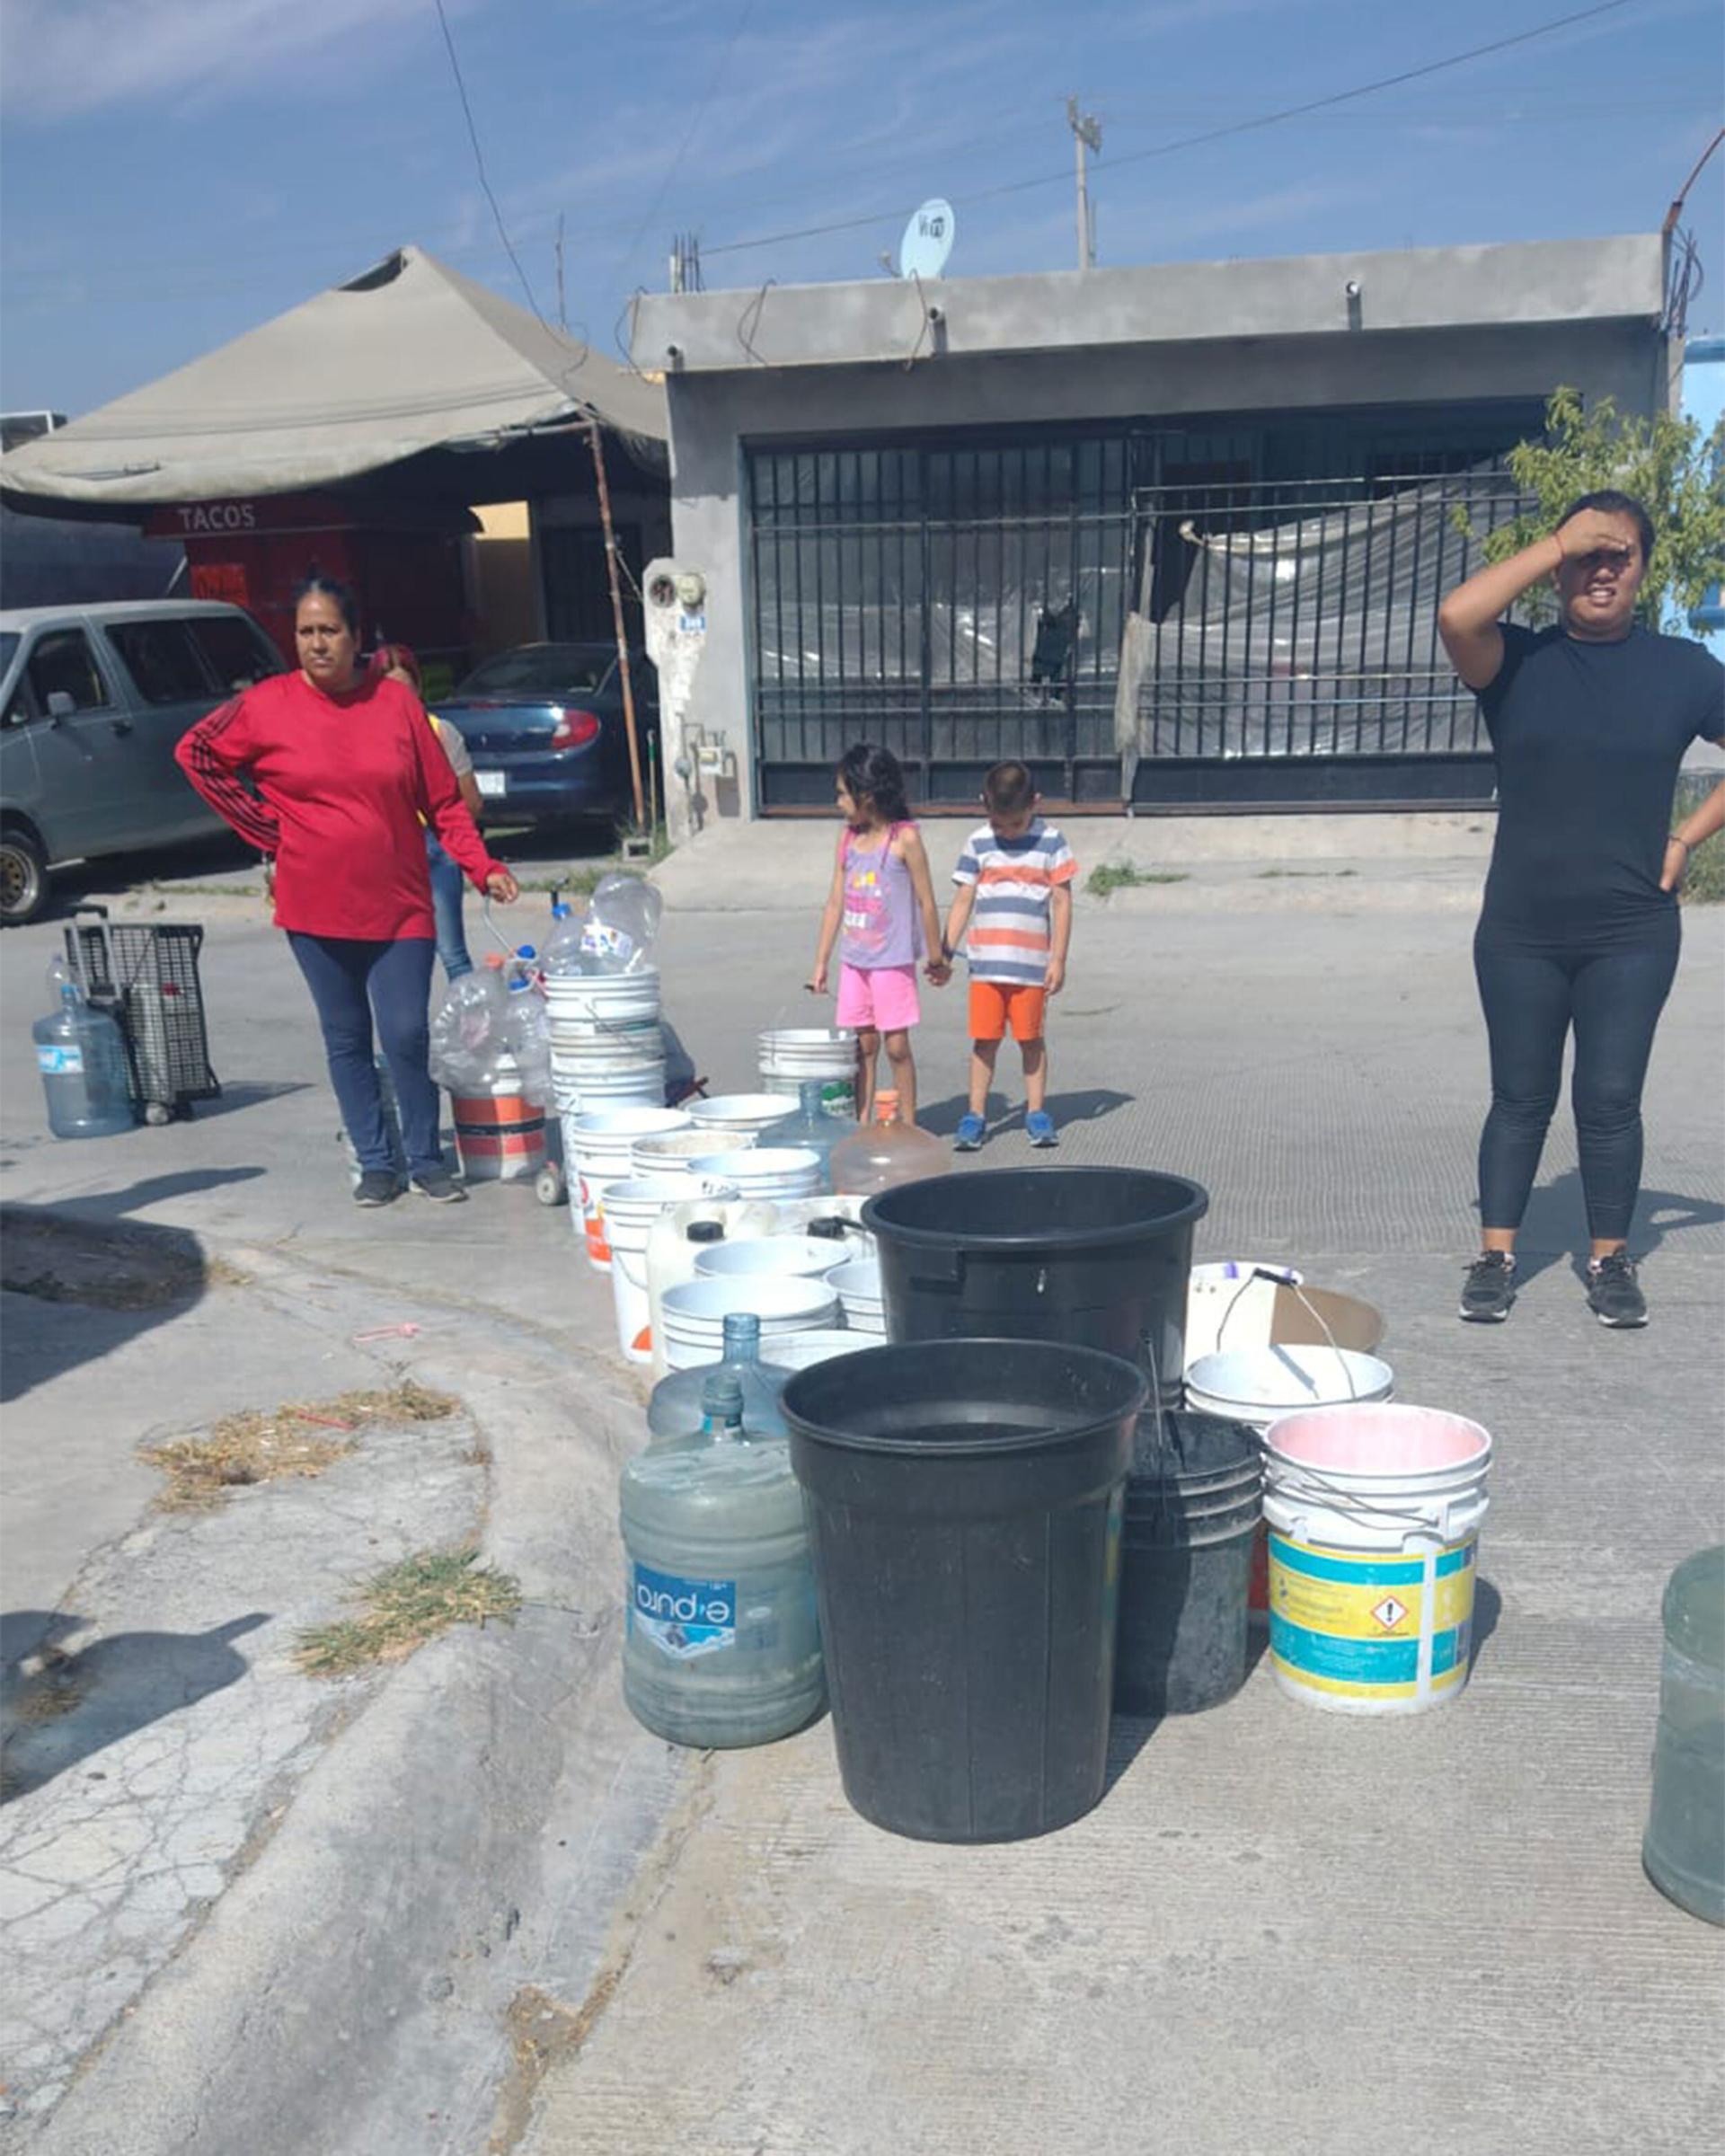 Water cuts in Monterrey, Mexico, seem to be impacting less wealthy communities while wealthier ones are not experiencing as many water cuts.